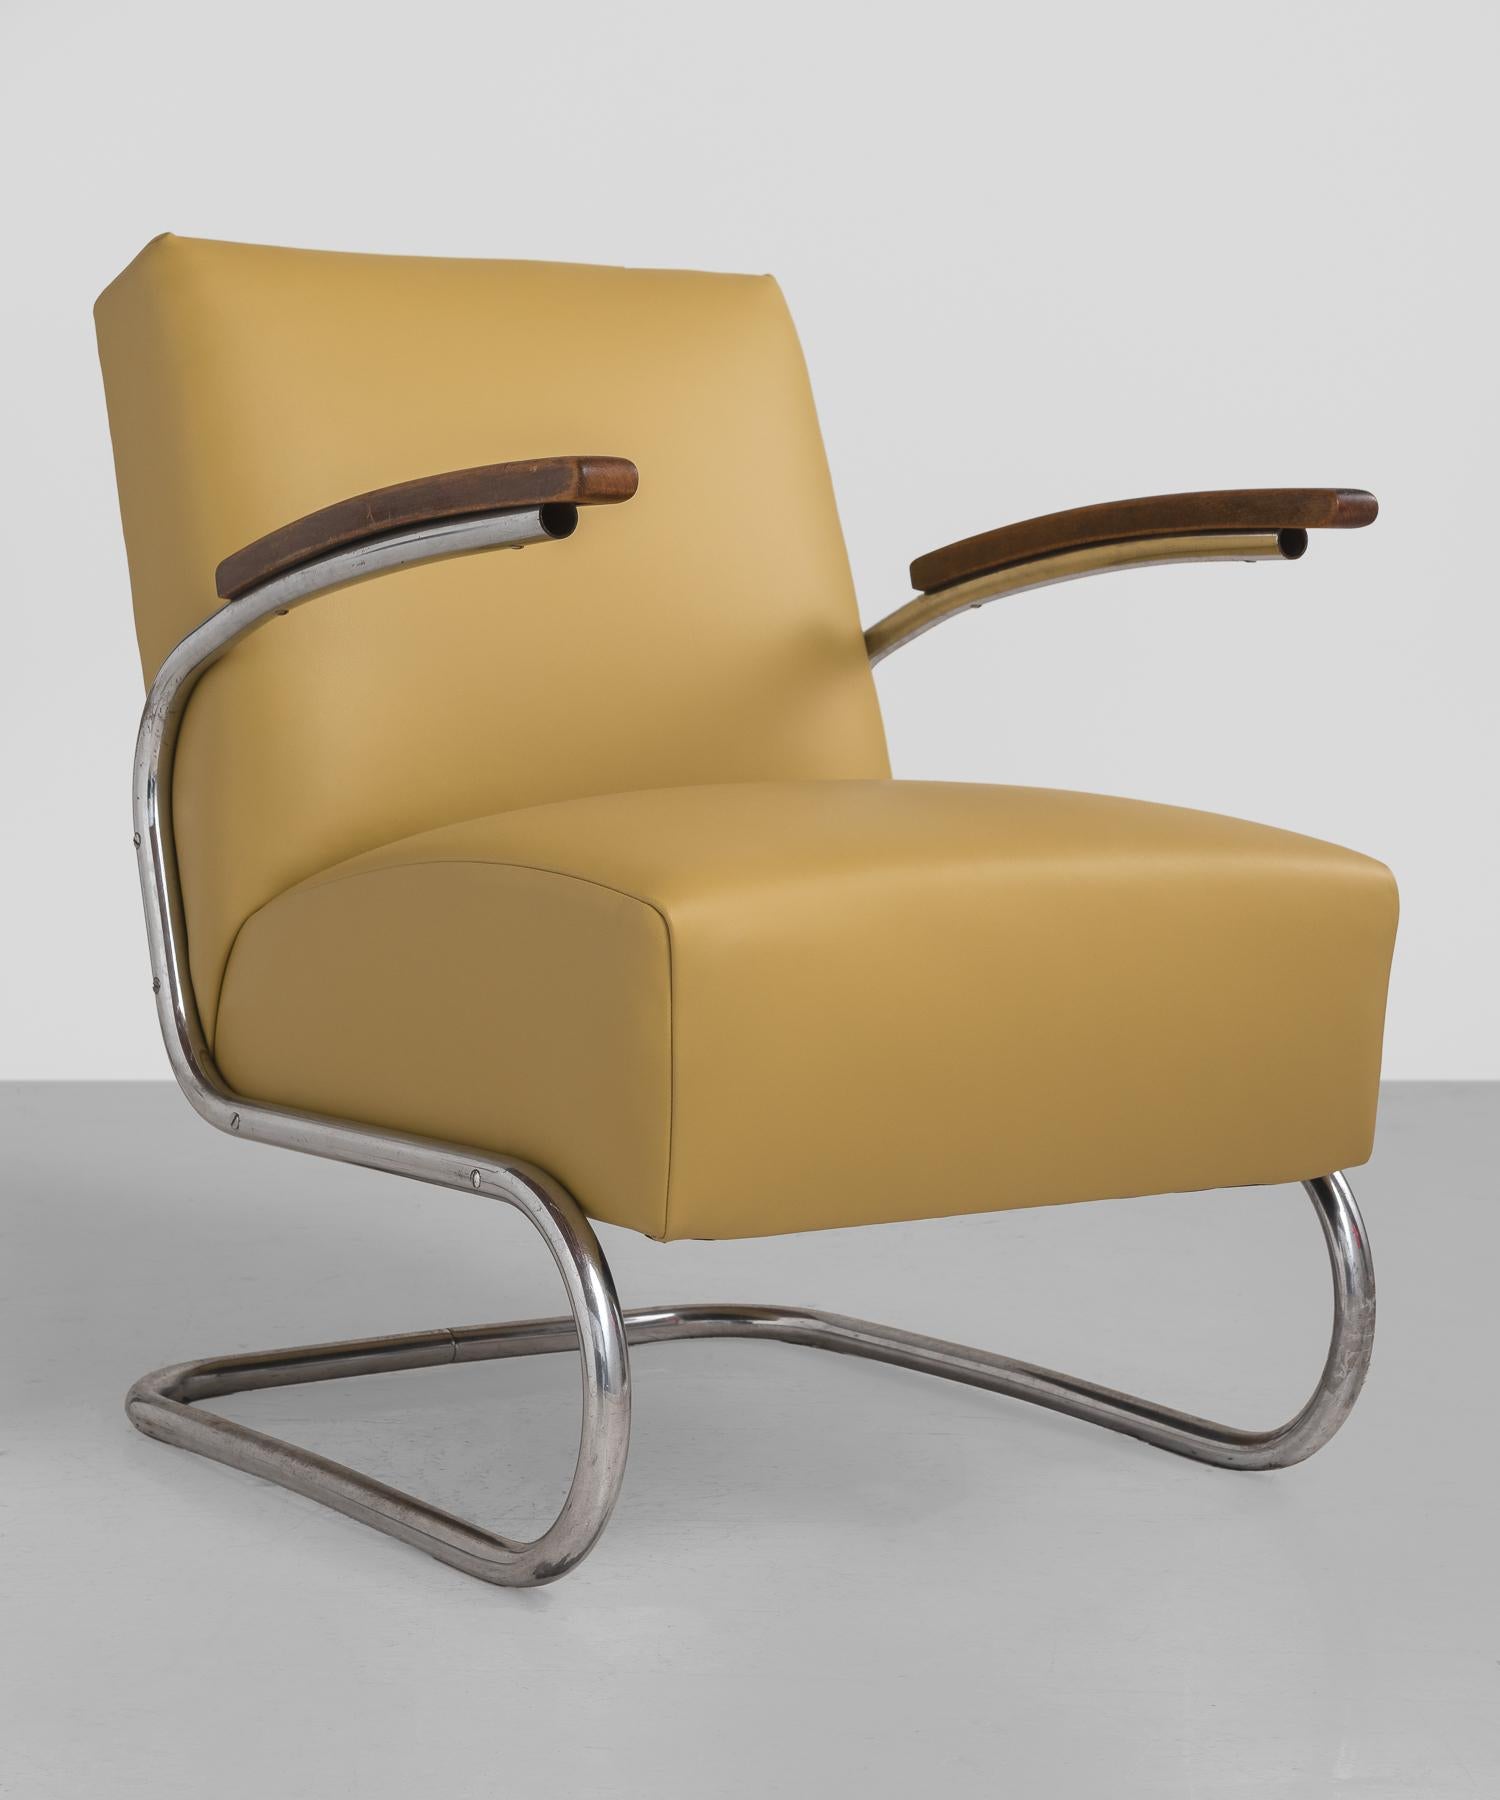 Thonet Modern Leather Armchair, Germany, circa 1930

Model SS41 Thonet armchair, newly reupholstered in Heirloom leather by Maharam. Cantilever frame in chromed steel with wooden armrests.

Measures: 27.5